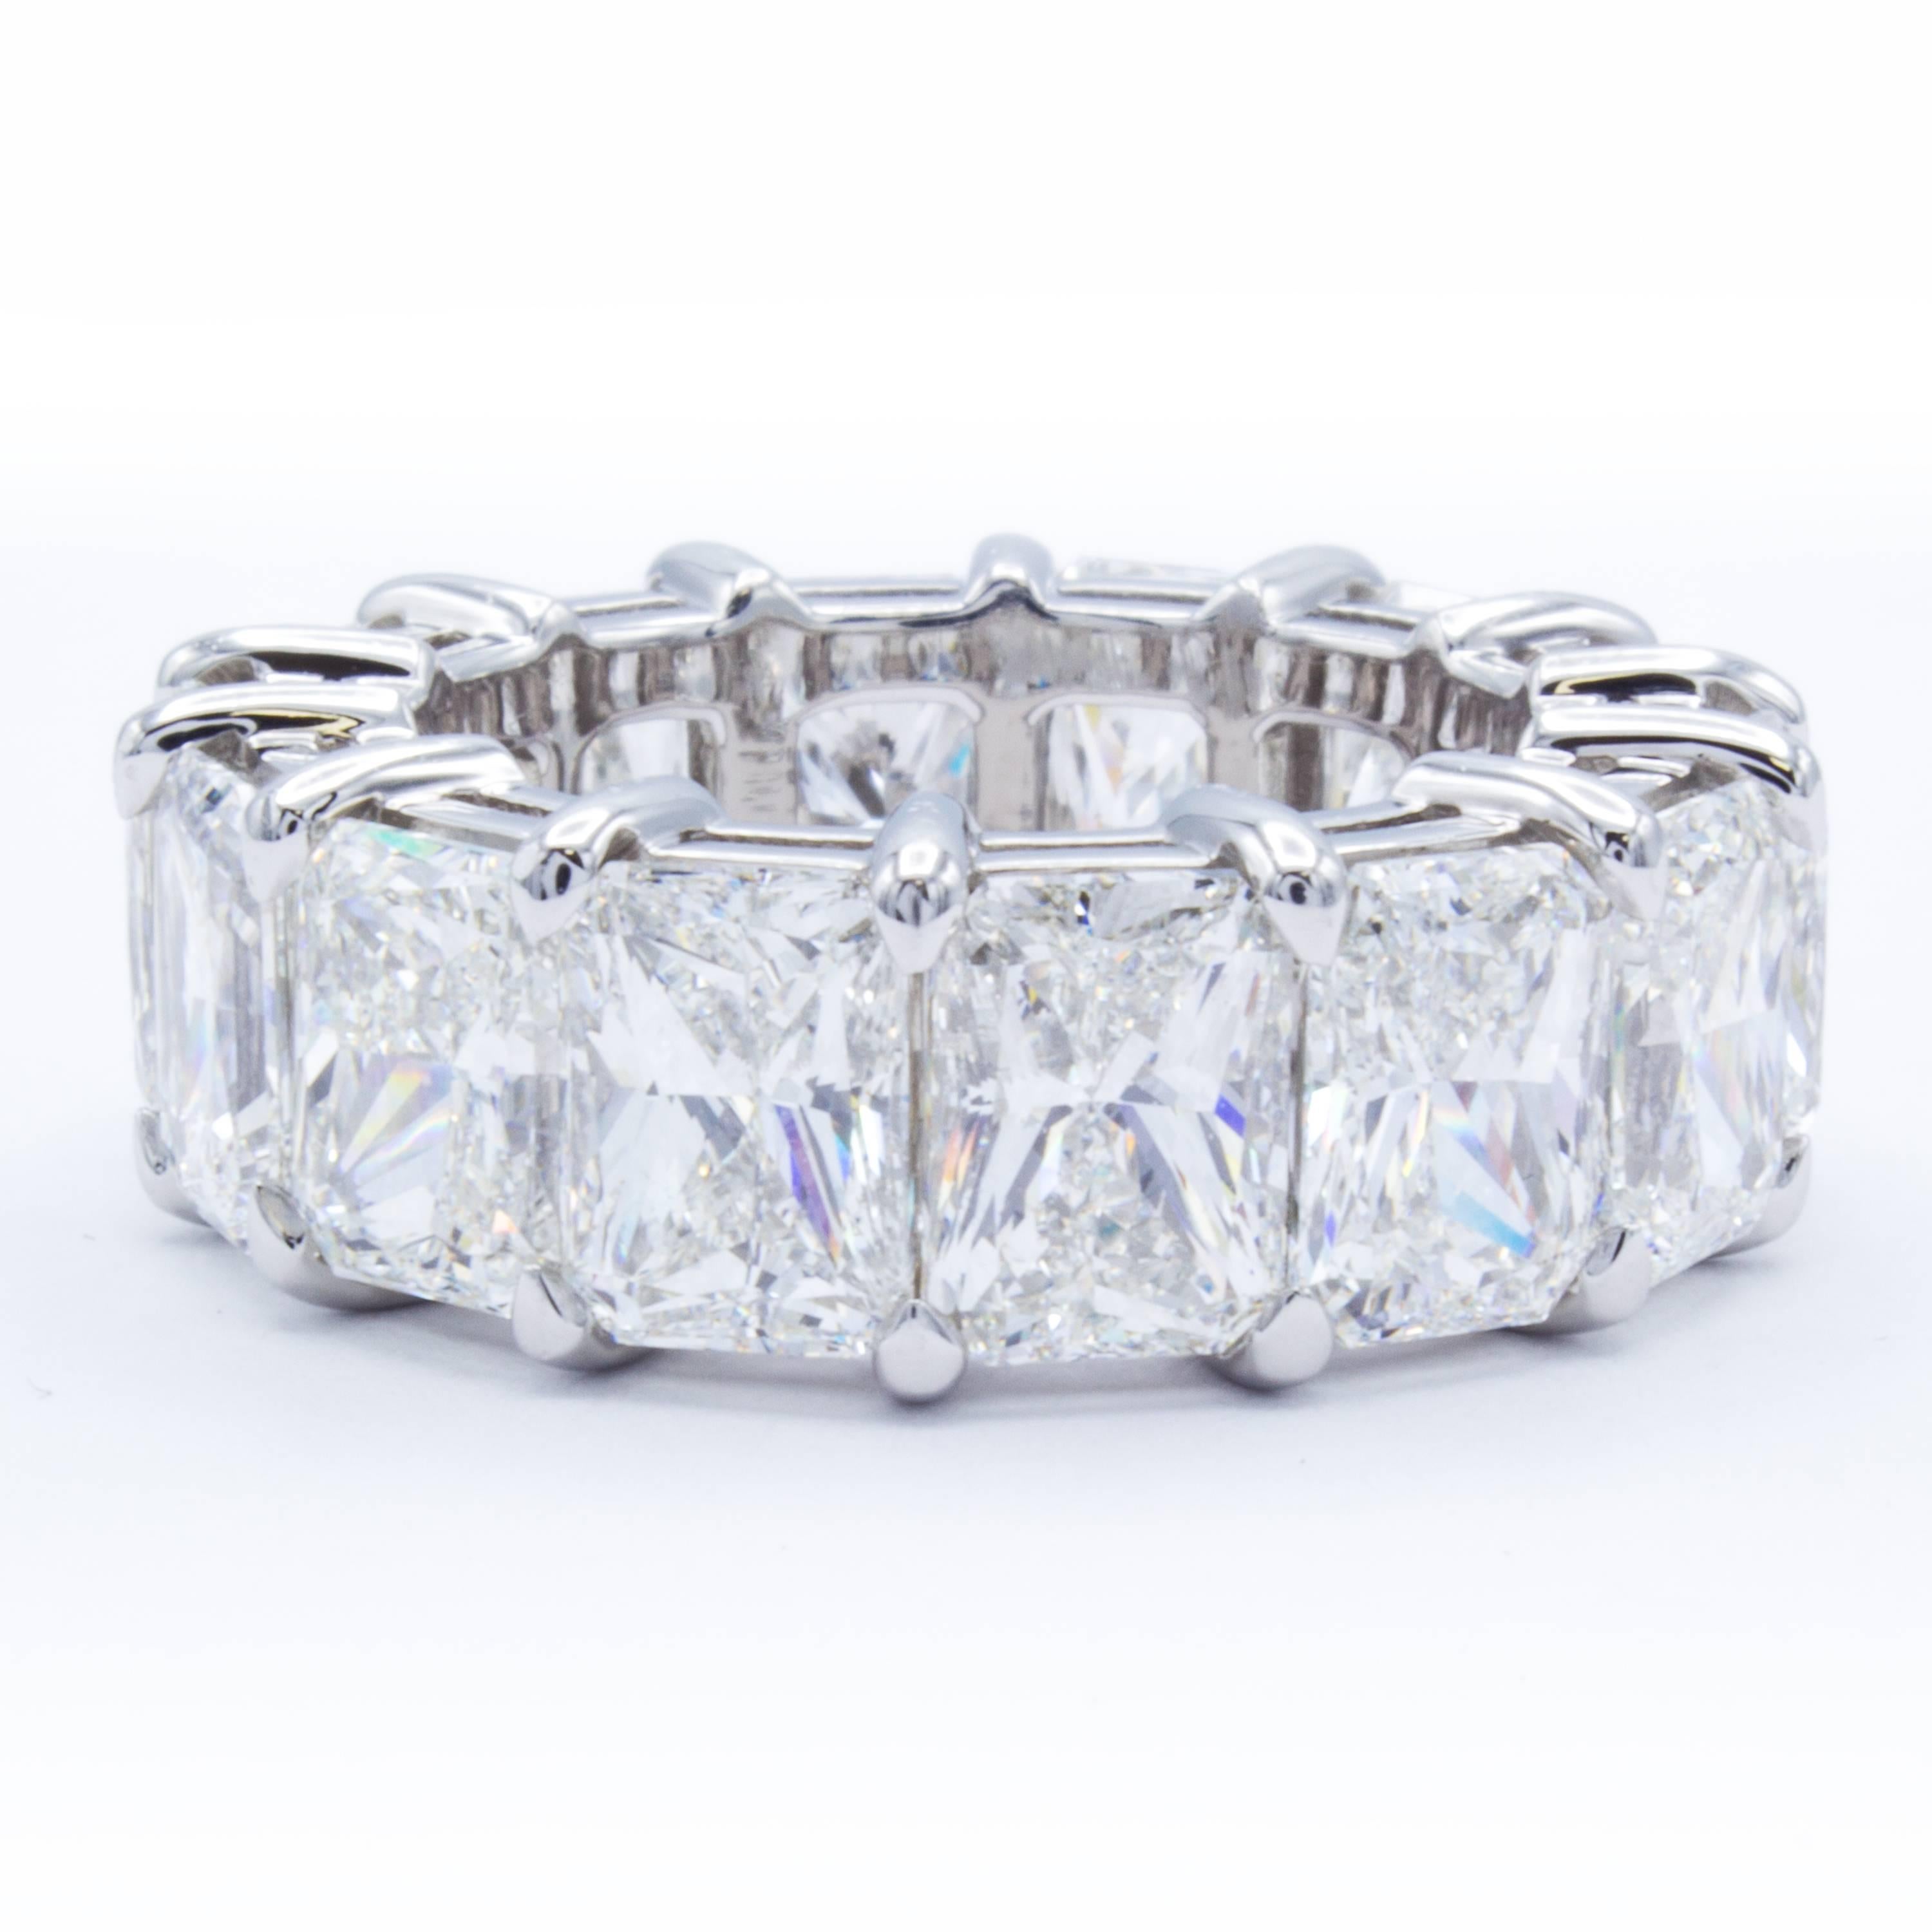 Breathtaking in its beauty and meticulous in its creation, this Rosenberg Diamonds & Co. eternity band carries 14.01 carats of GIA certified radiant cut diamonds set into a gorgeous platinum band. Hand selected with impeccable care to perfectly